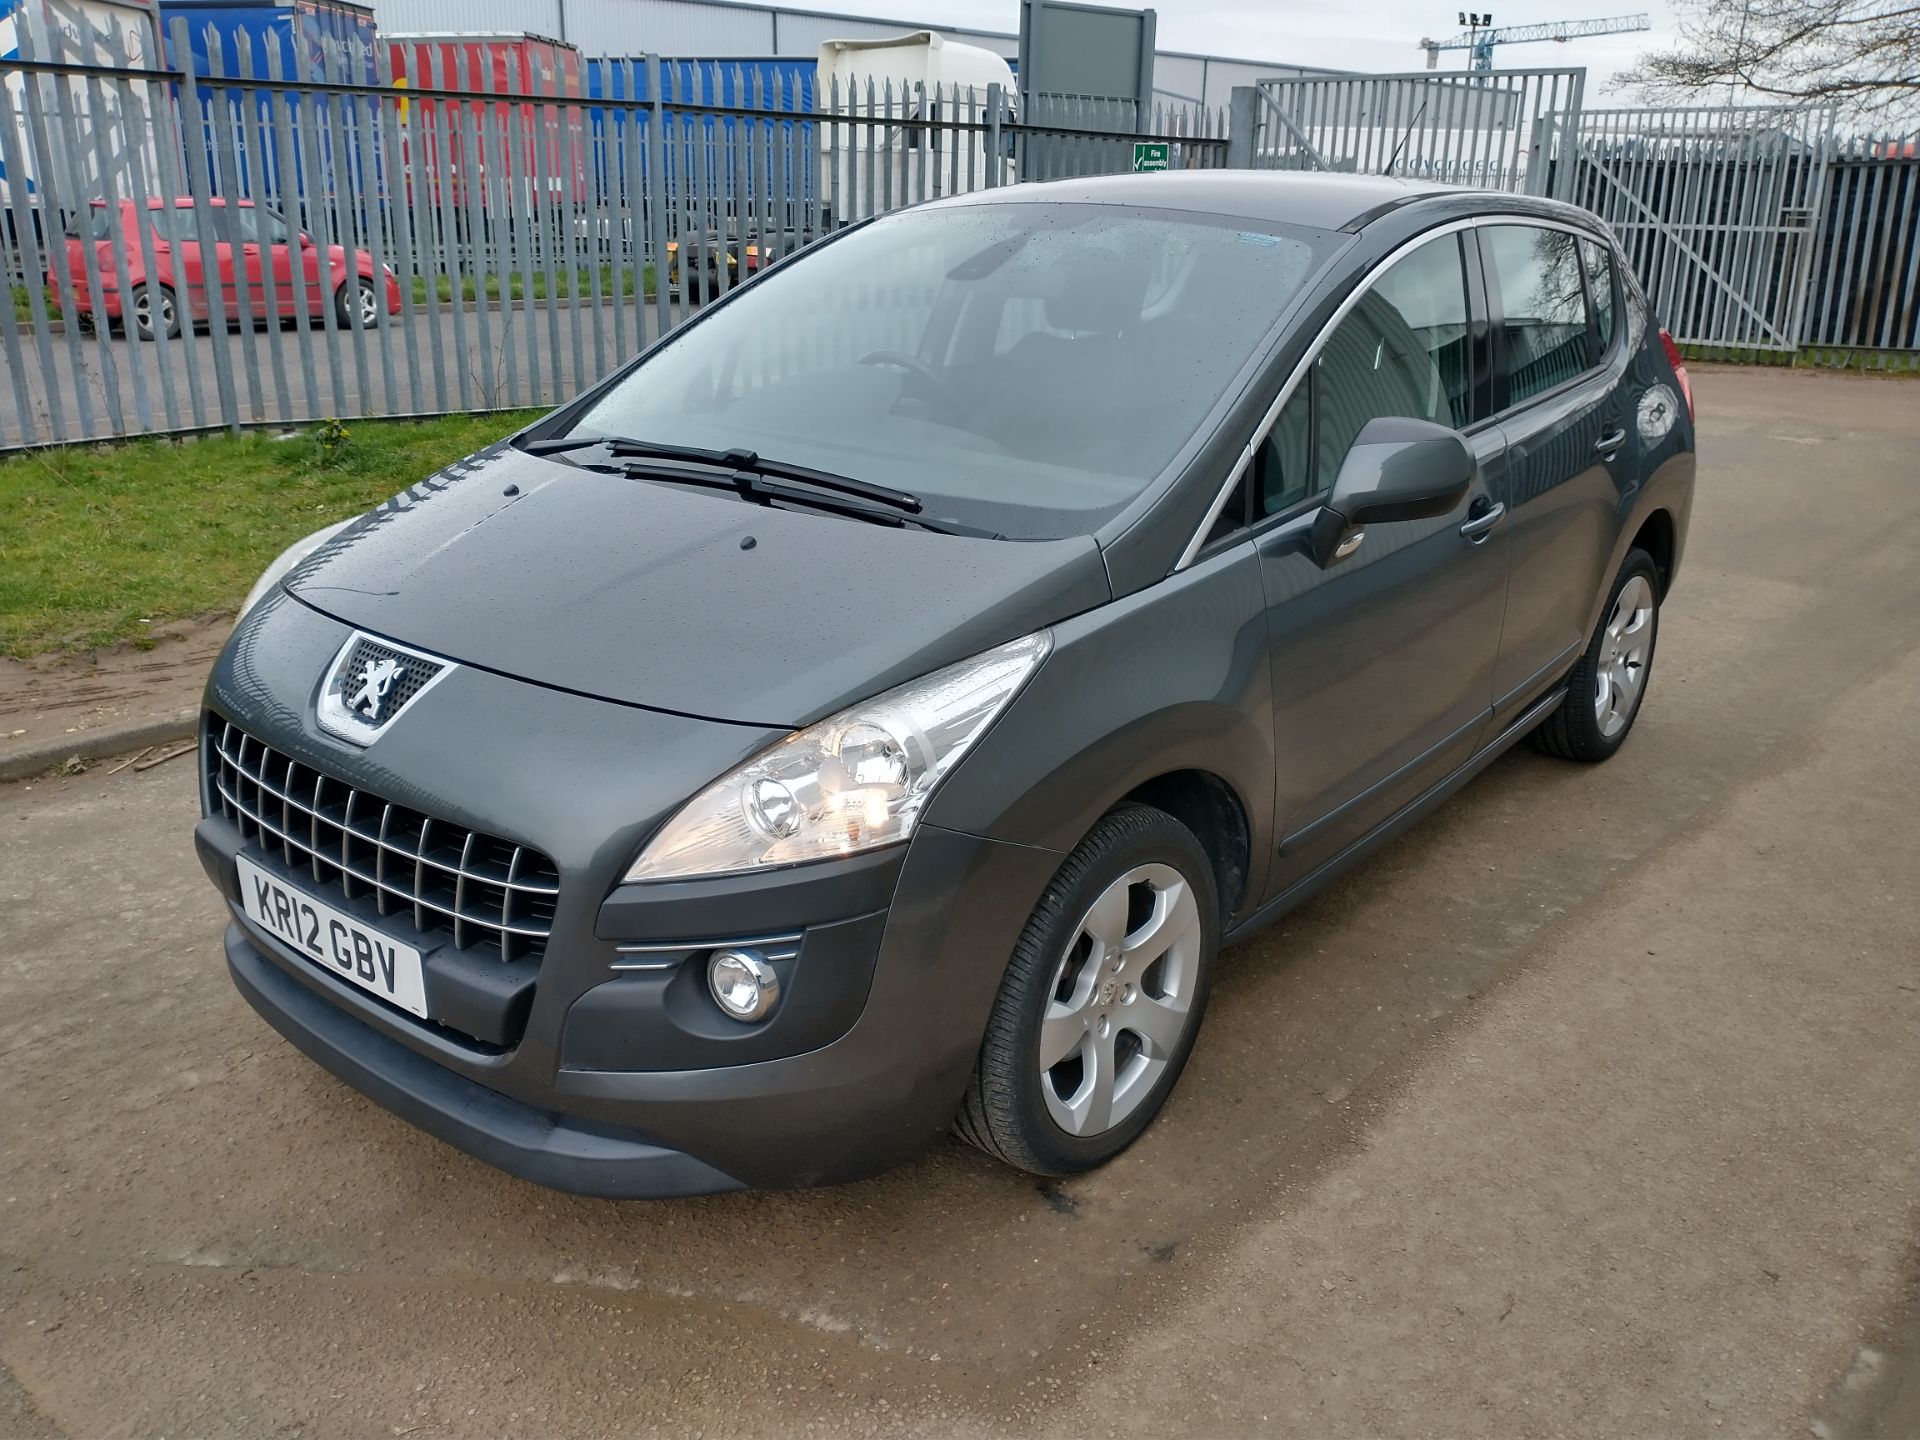 2012 Peugeot 3008 Active HDI 1.6 5DR SUV - CL505 - NO VAT ON THE HAMM